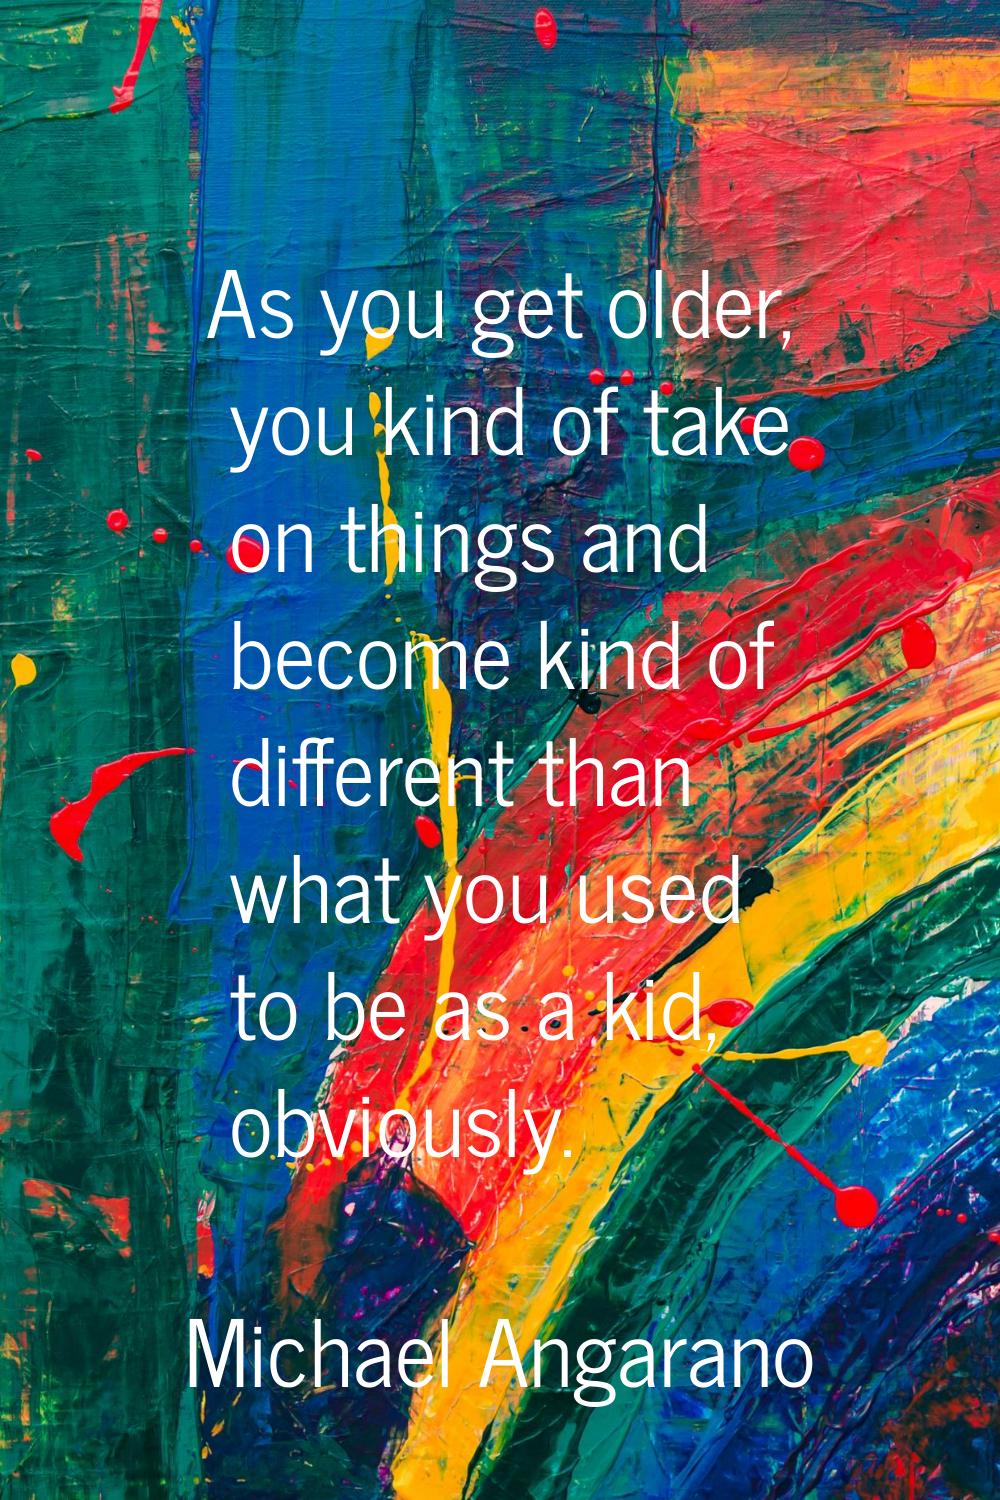 As you get older, you kind of take on things and become kind of different than what you used to be 